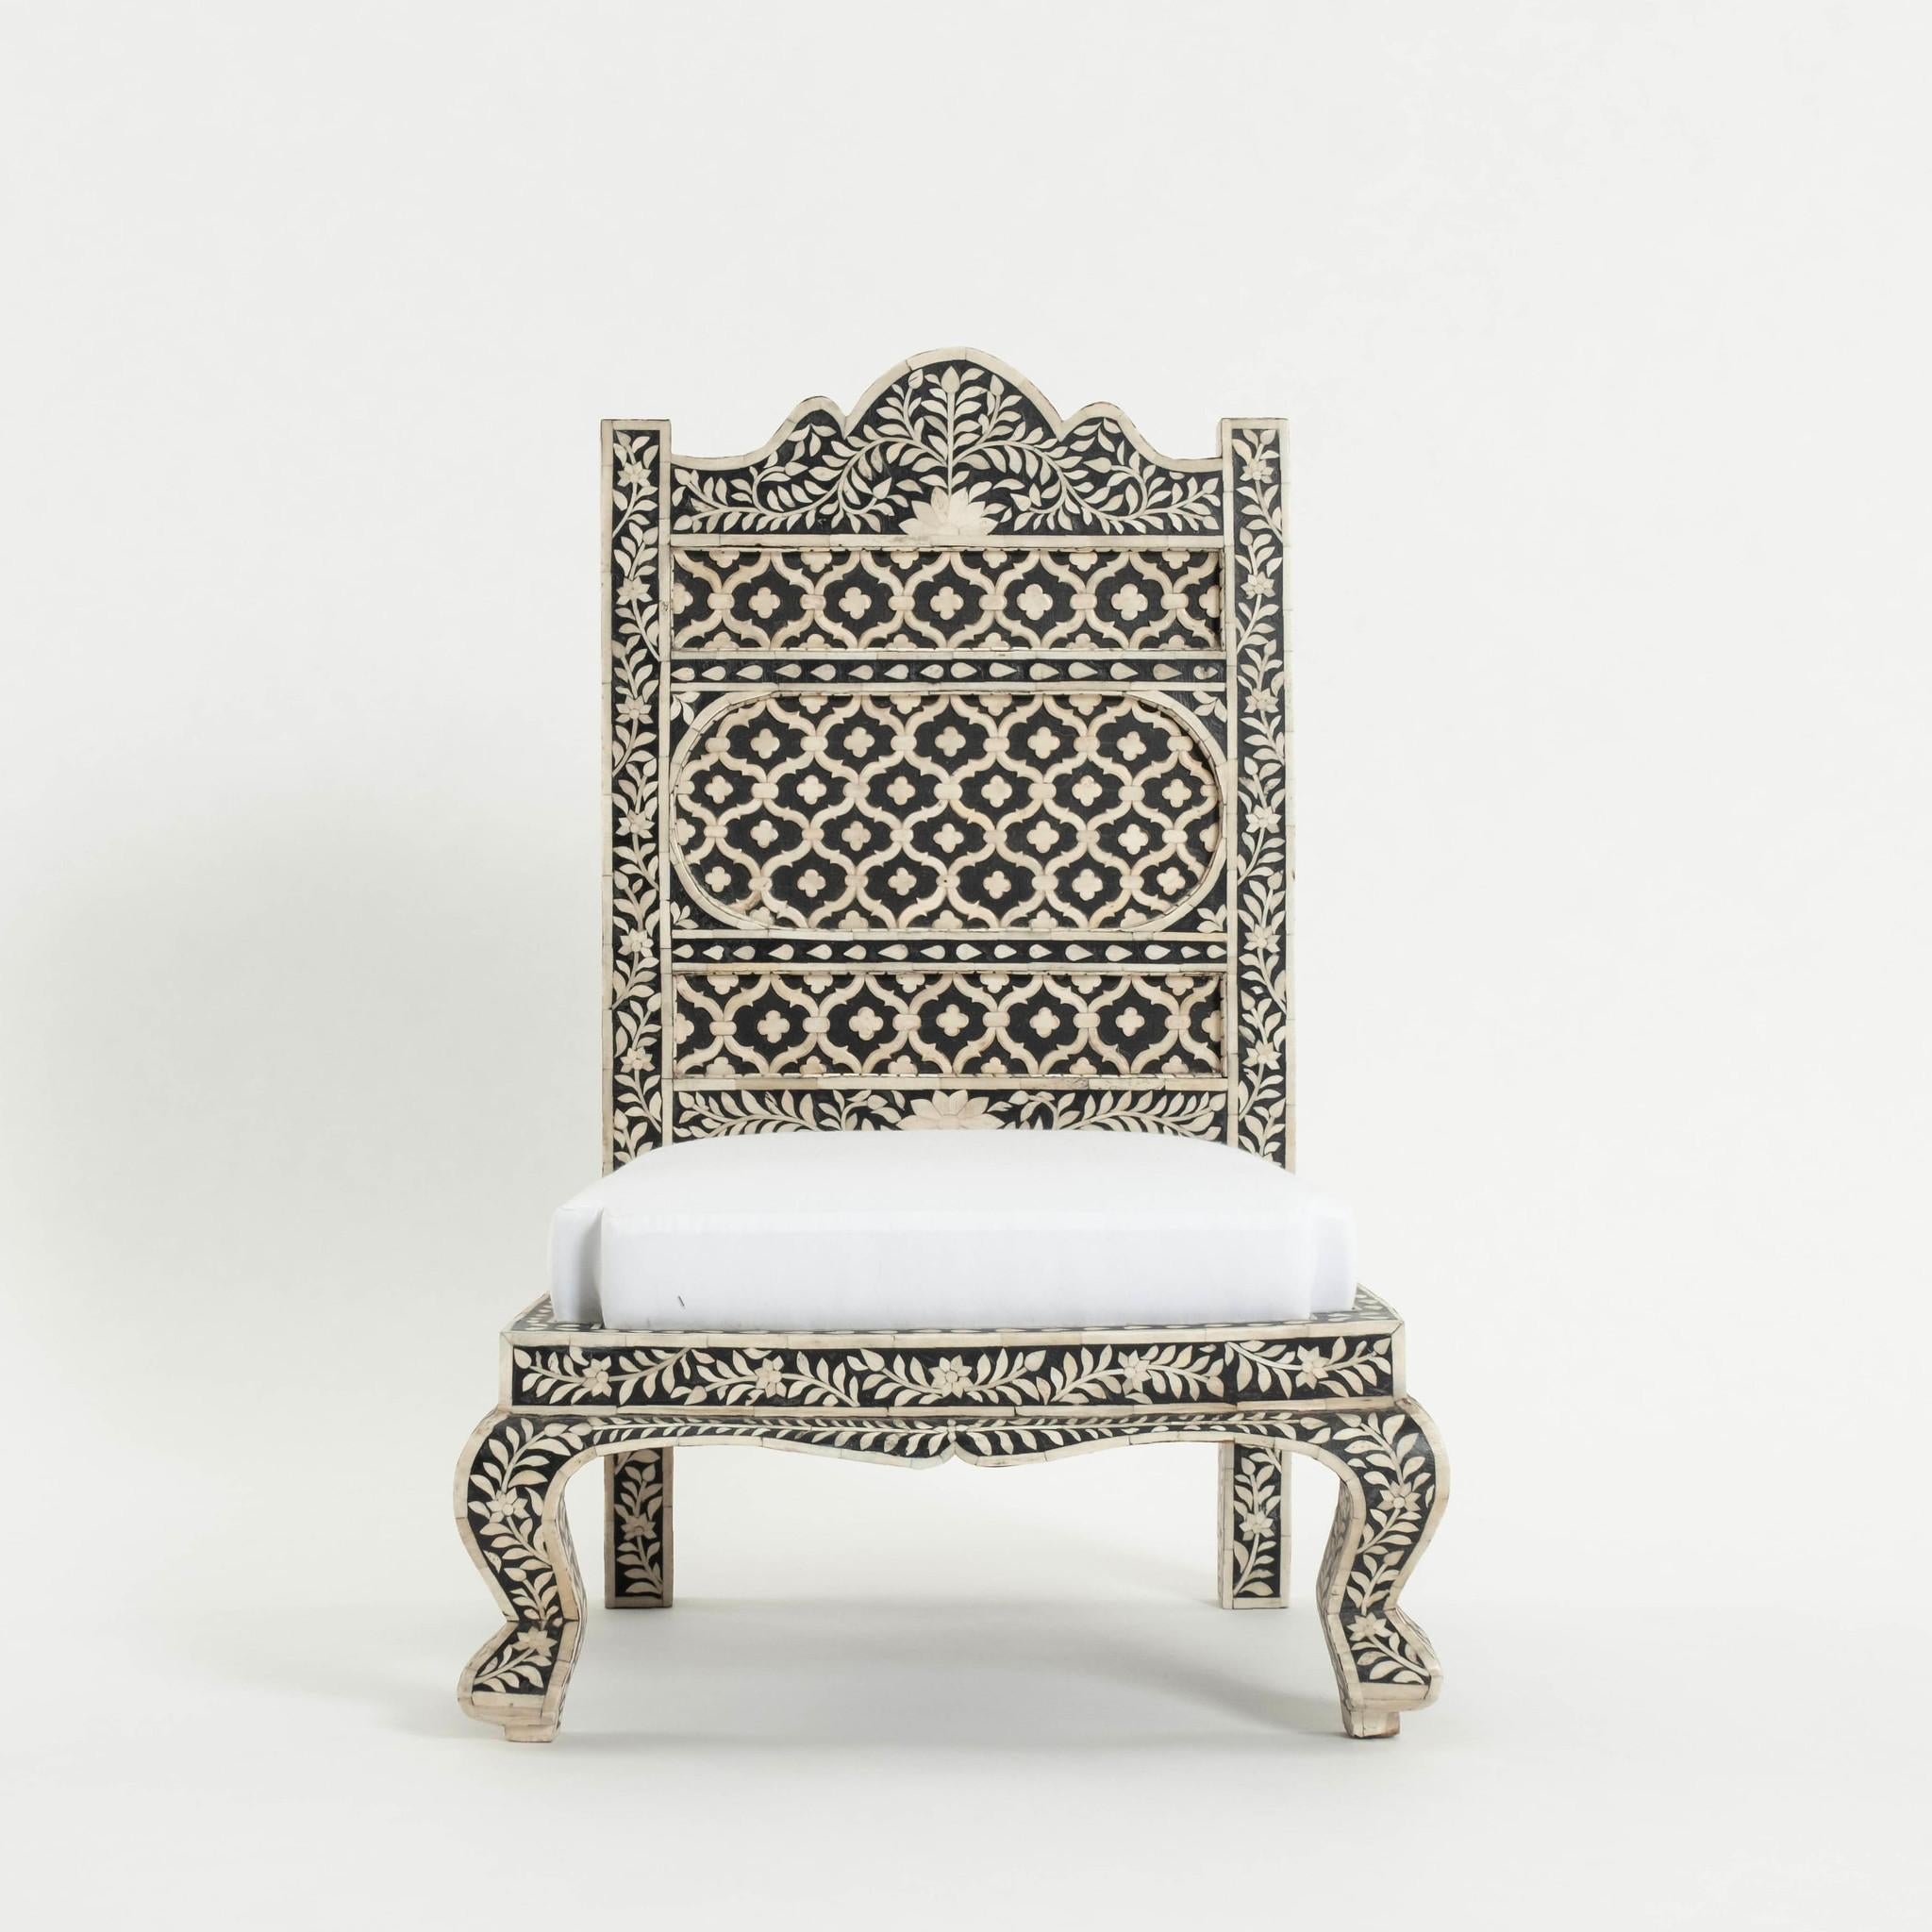 A 20th Century Anglo Indian ebonized wood chair with beautifully detailed bone inlay.